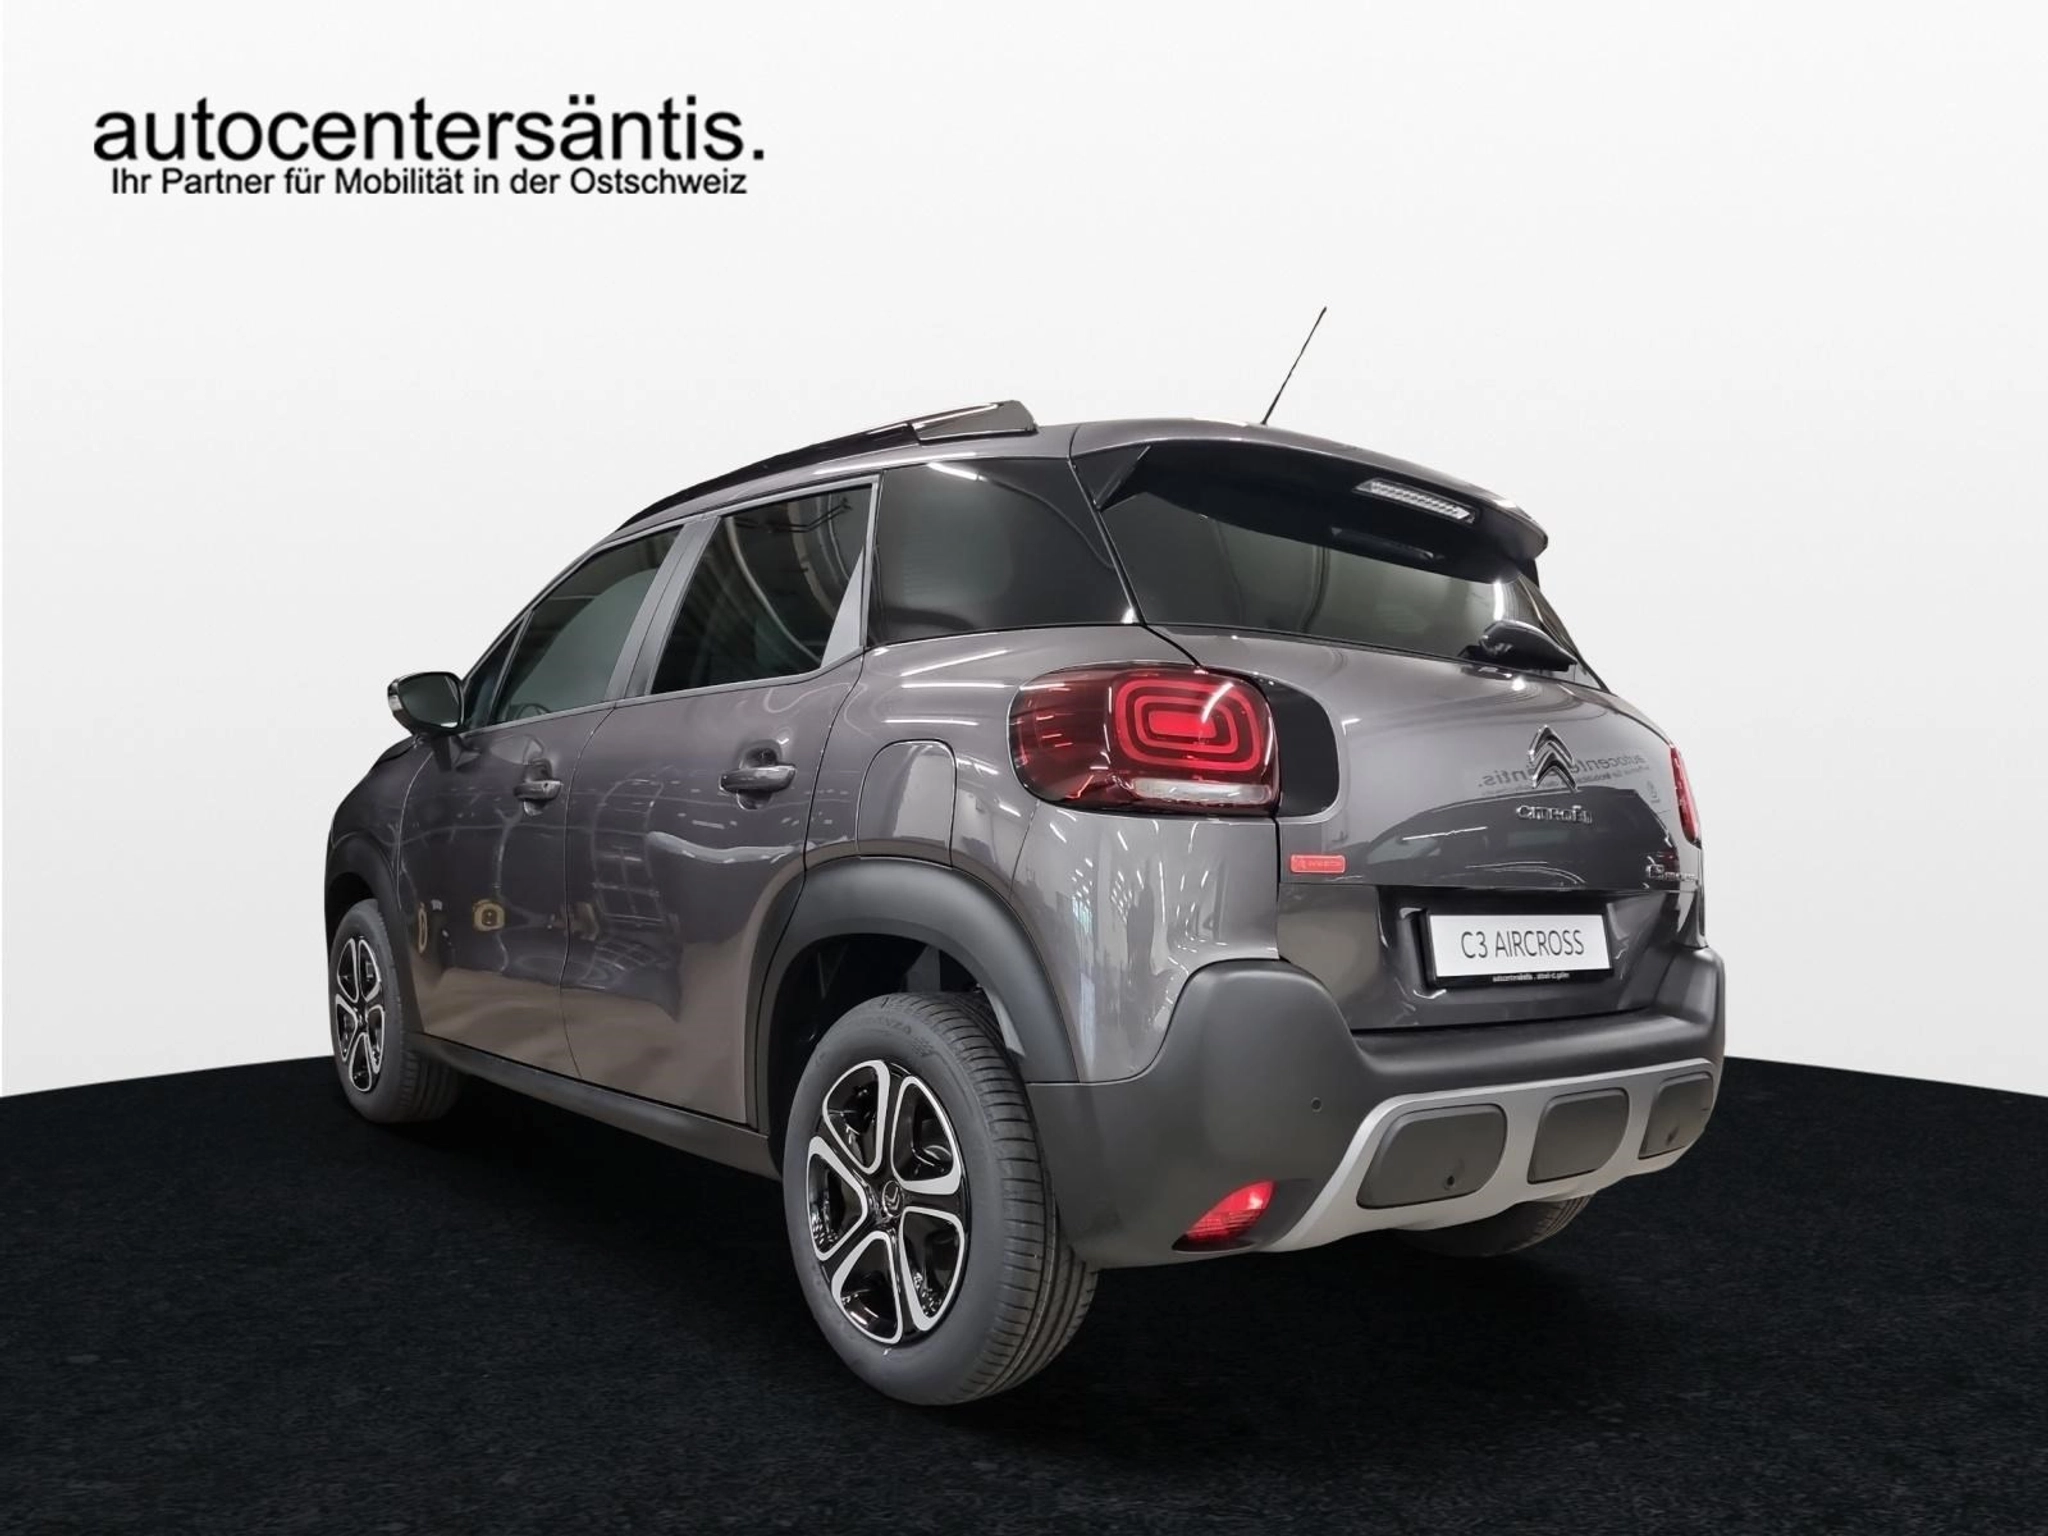 Citroen C3 Aircross Leasing in Switzerland from CHF 178 